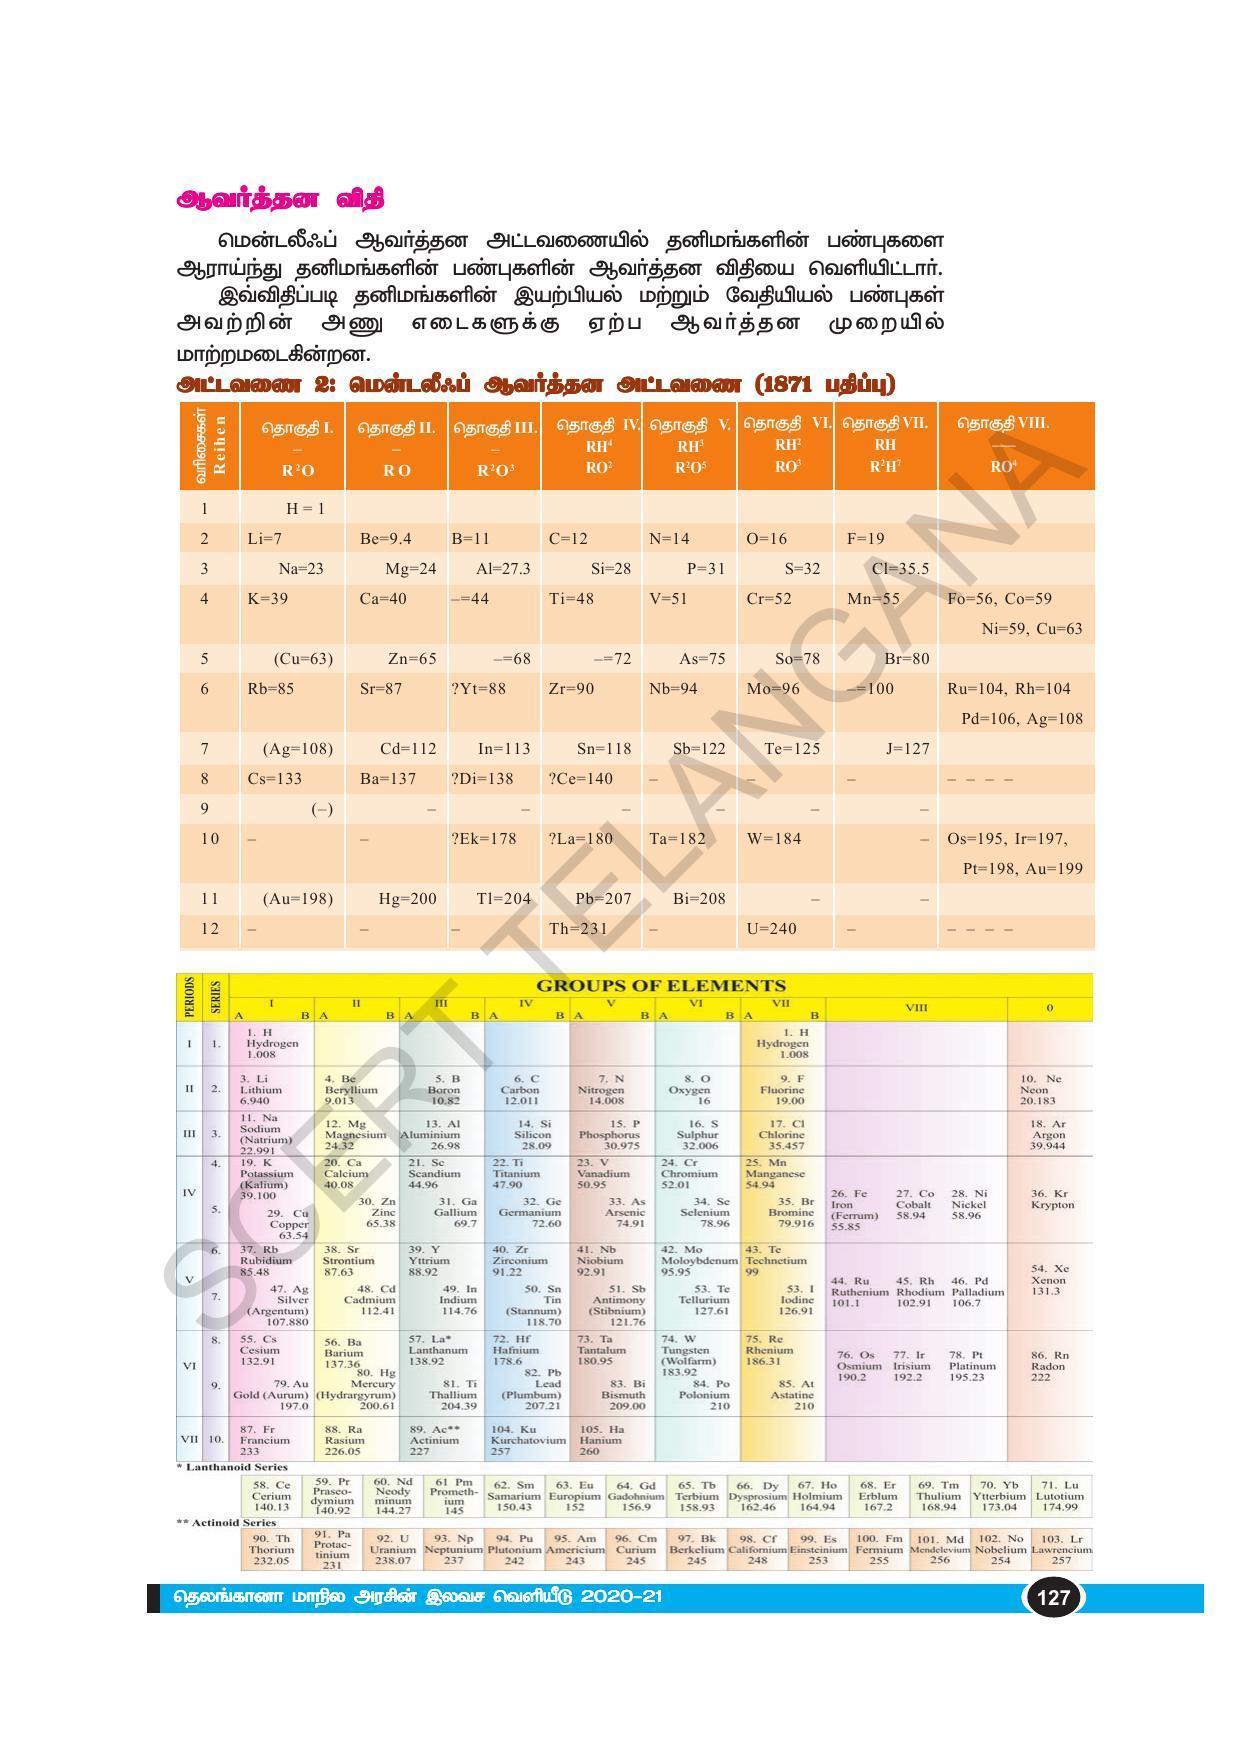 TS SCERT Class 10 Physical Science(Tamil Medium) Text Book - Page 139